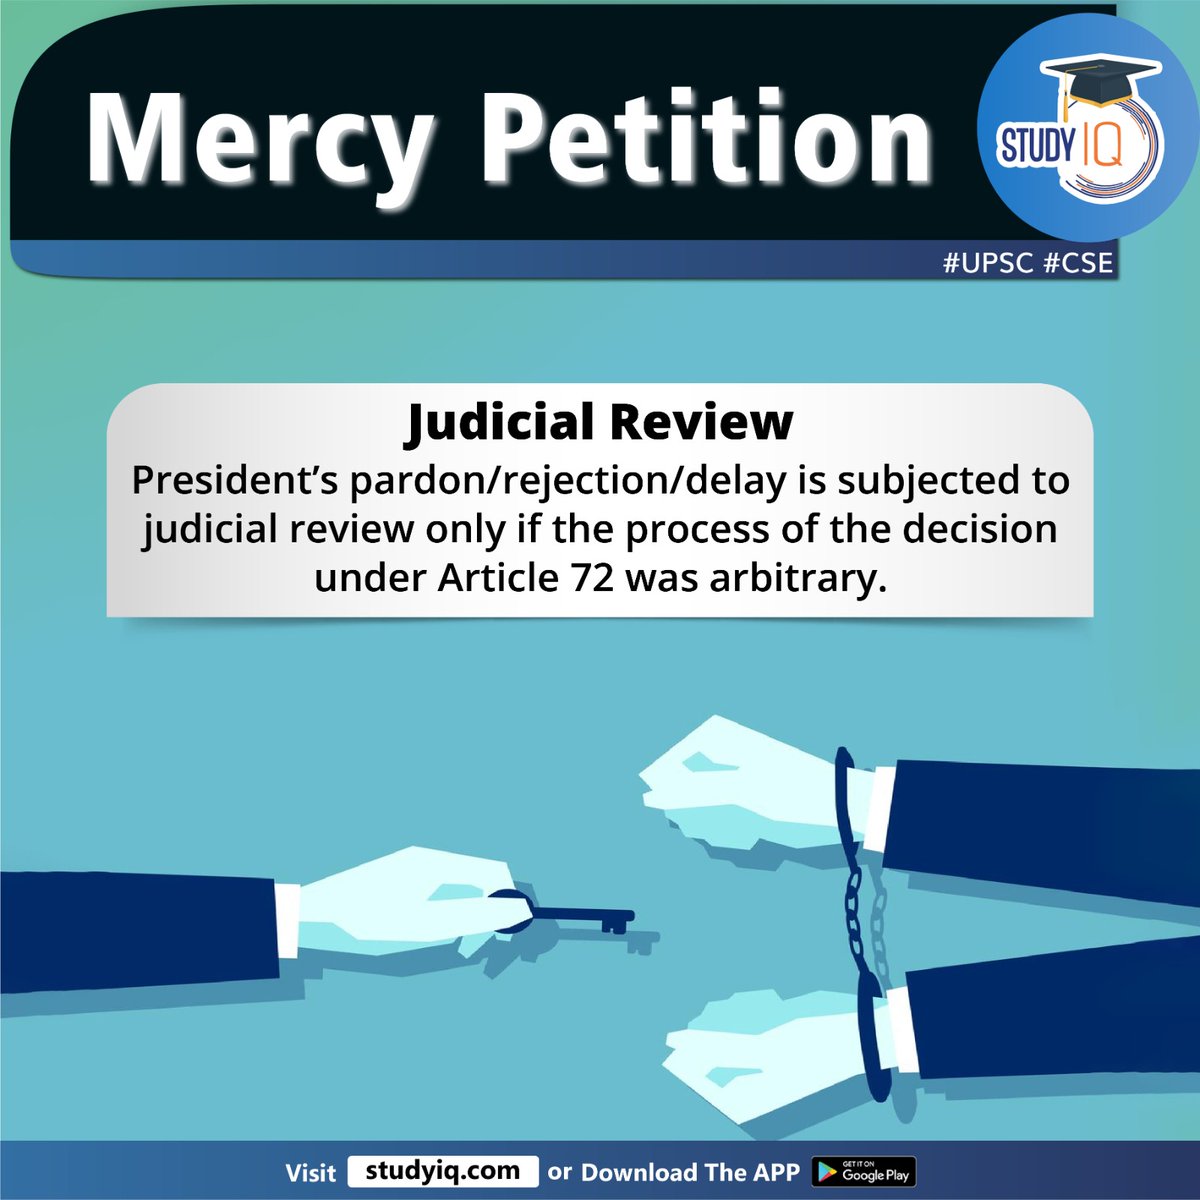 Mercy Petition

#mercypetition #supremecourt #deathpenalty #pujab #chiefminister #punjabcm #miscarriageofjustice #usa #uk #canada #india #article72 #indianconstitution #governorofstate #statelaw #judicialreview #presidentofindia #upsc #cse #ips #ias #constitutionofindia